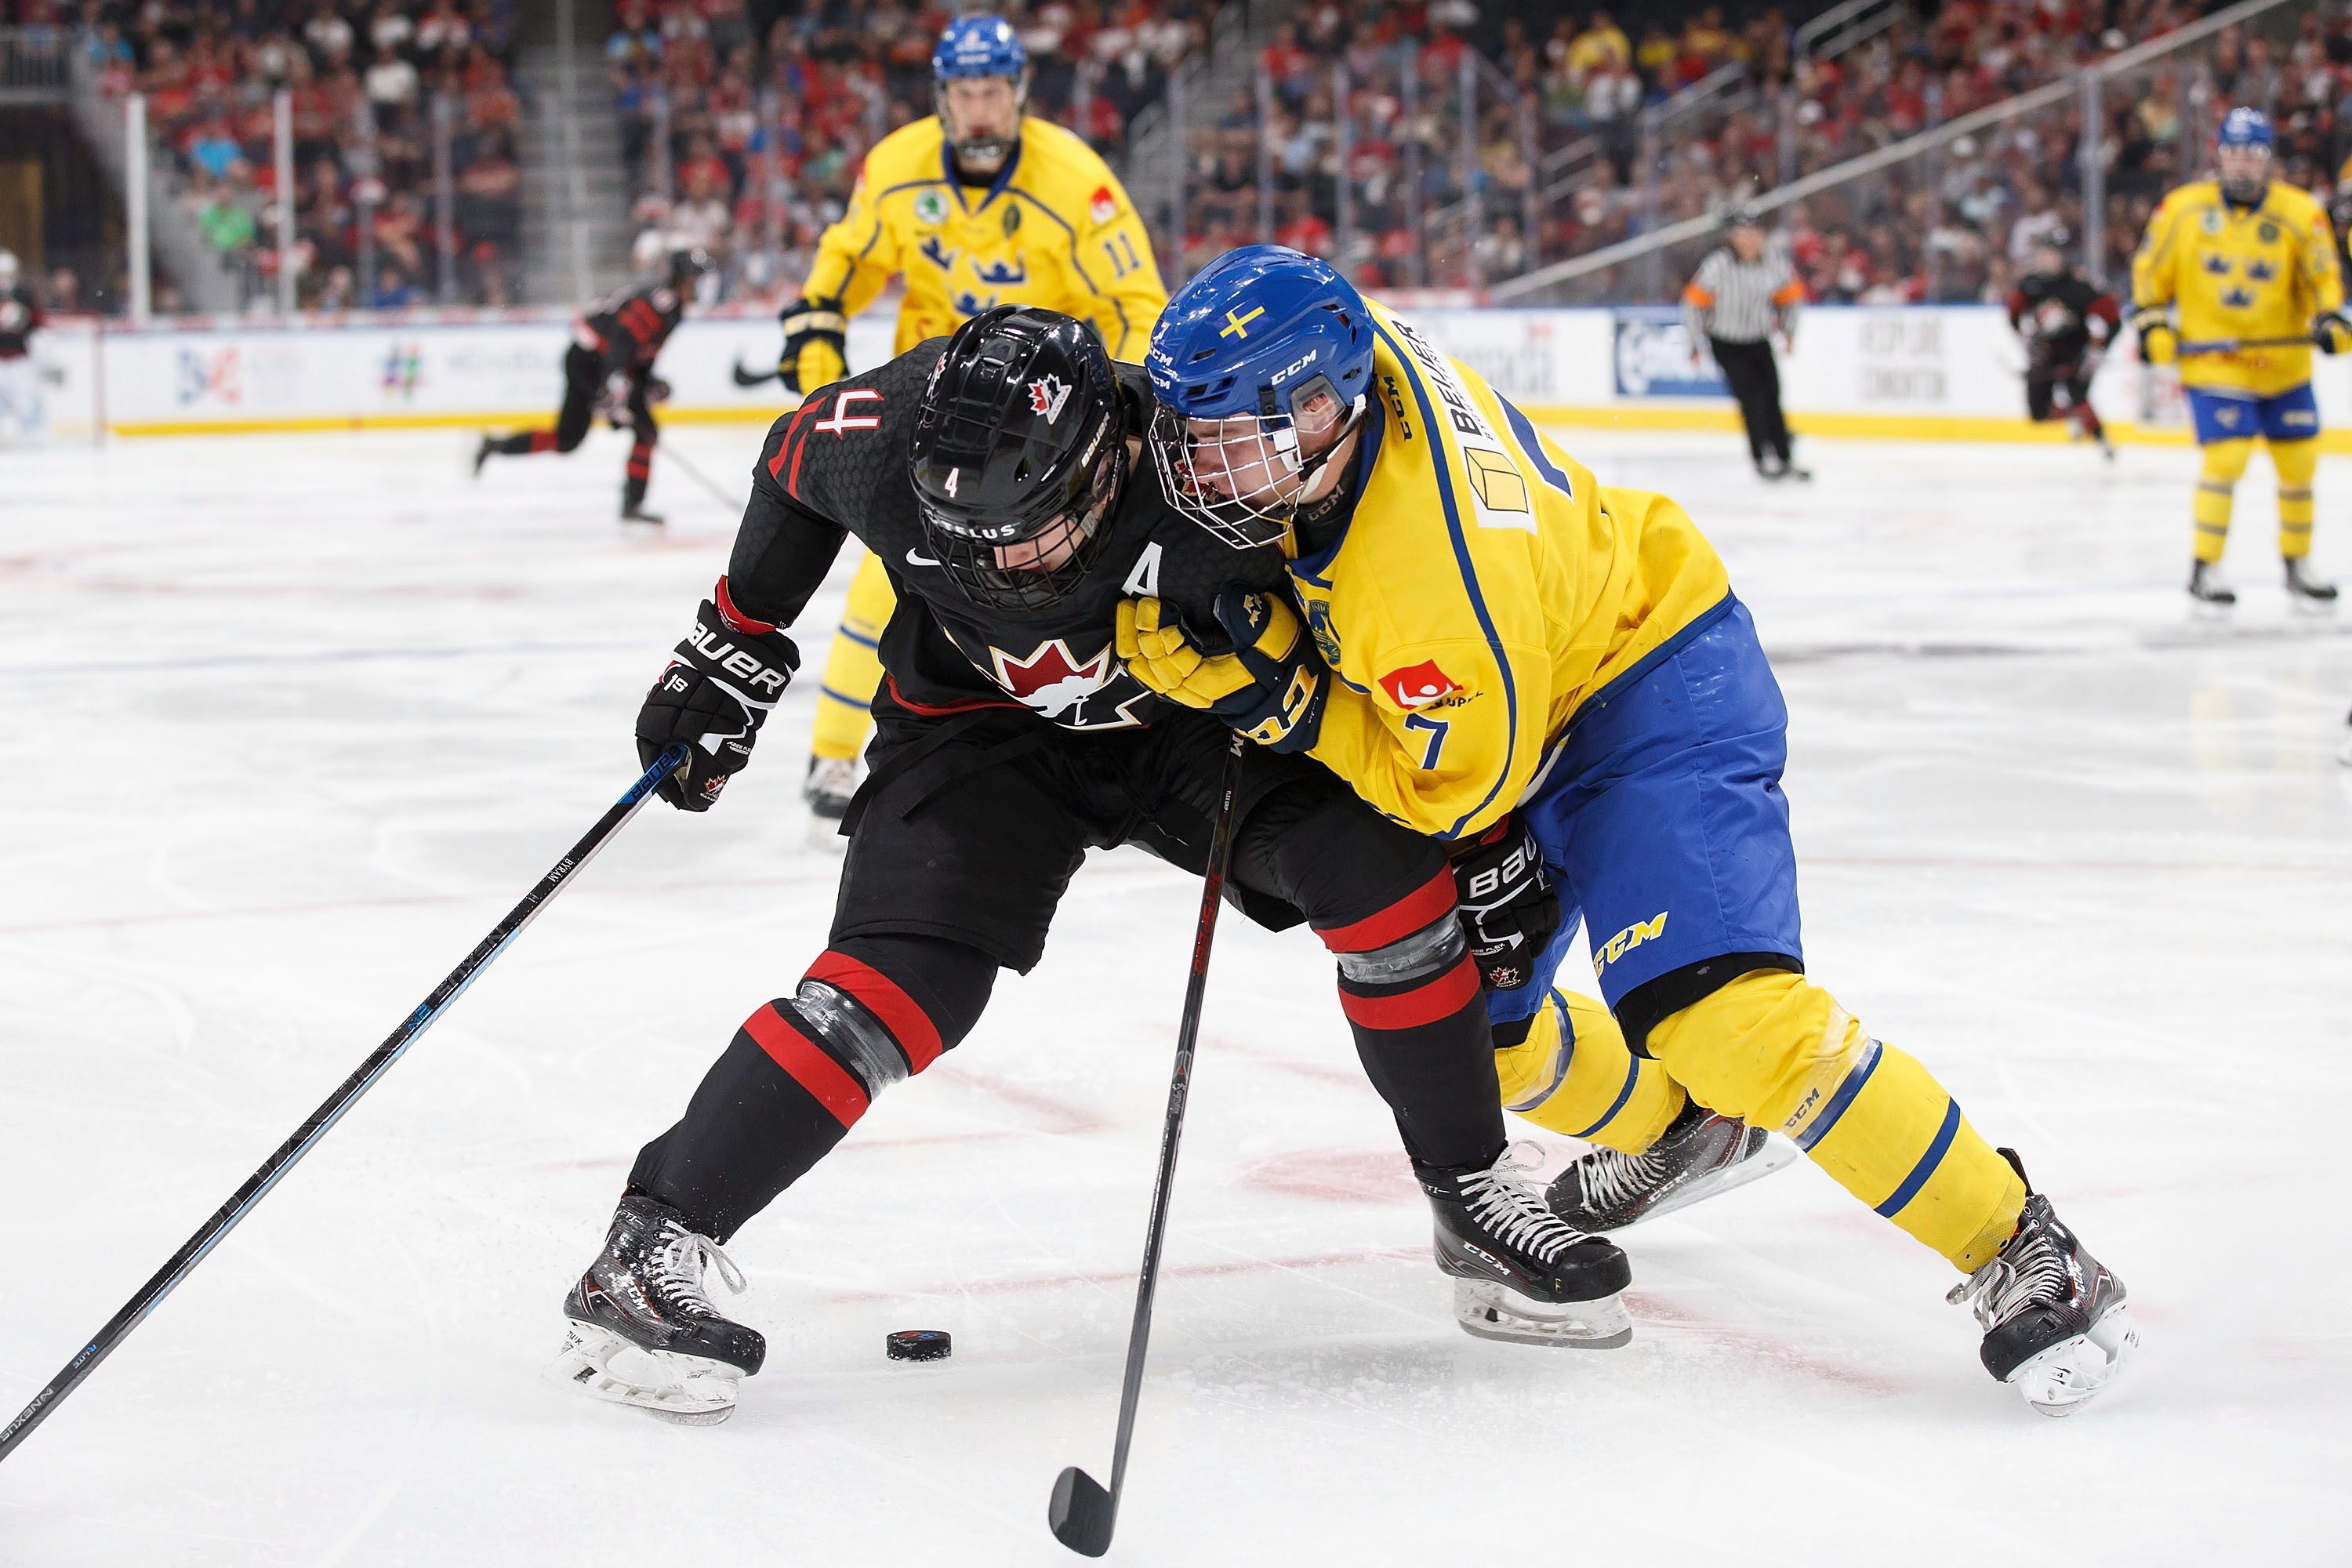 Team Canada playoff bound after 4-3 win against Sweden at Hlinka Gretzky Cup 